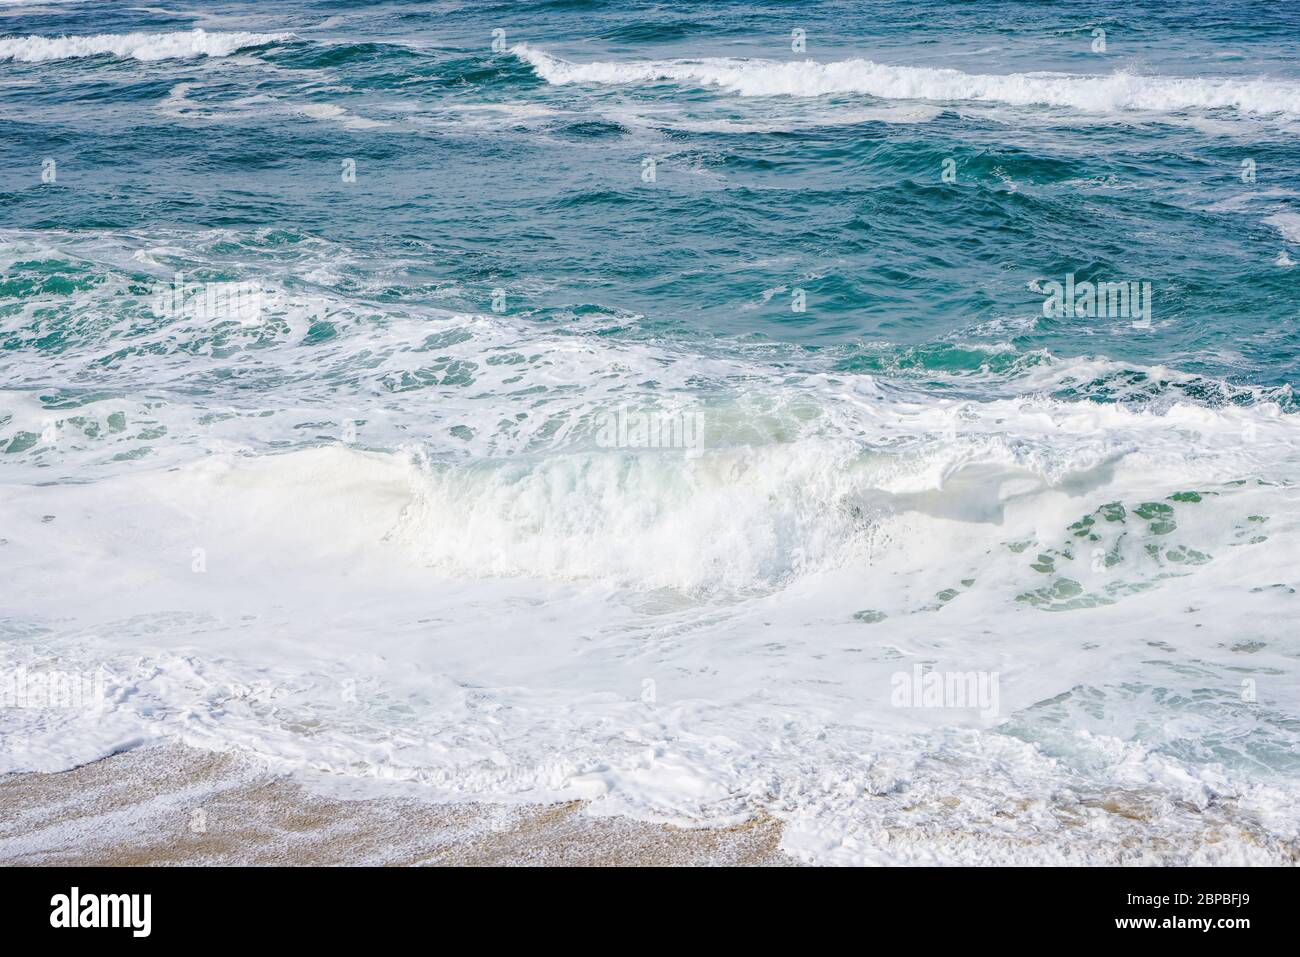 Turquoise ocean water with small white foam waves gently crashing into golden sand beach Stock Photo